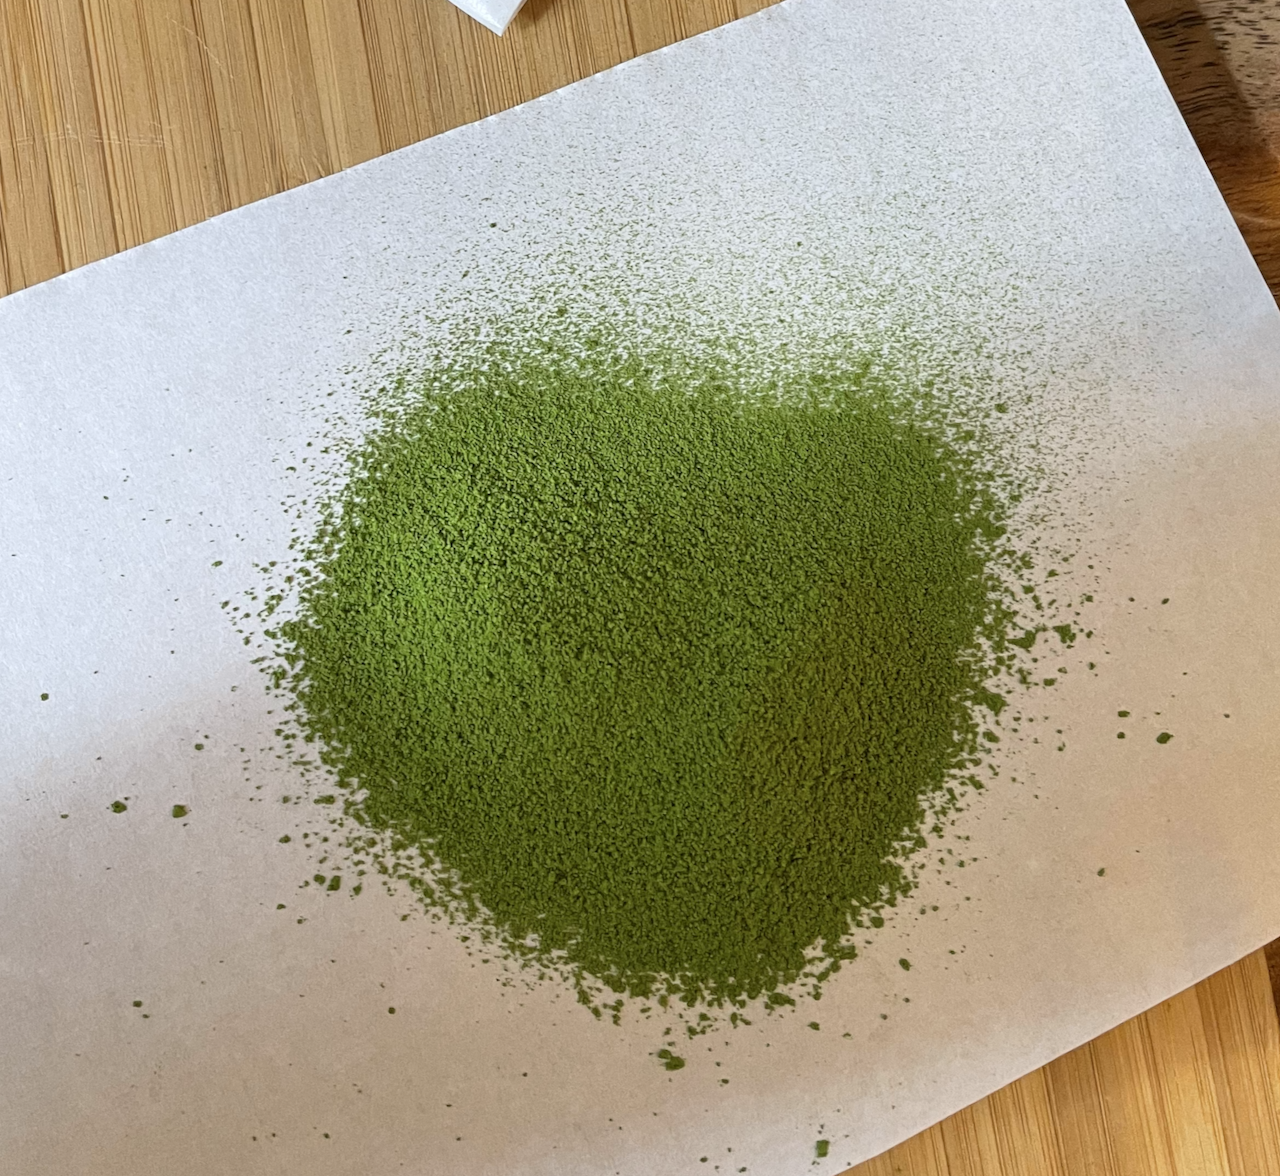 The matcha in powder form